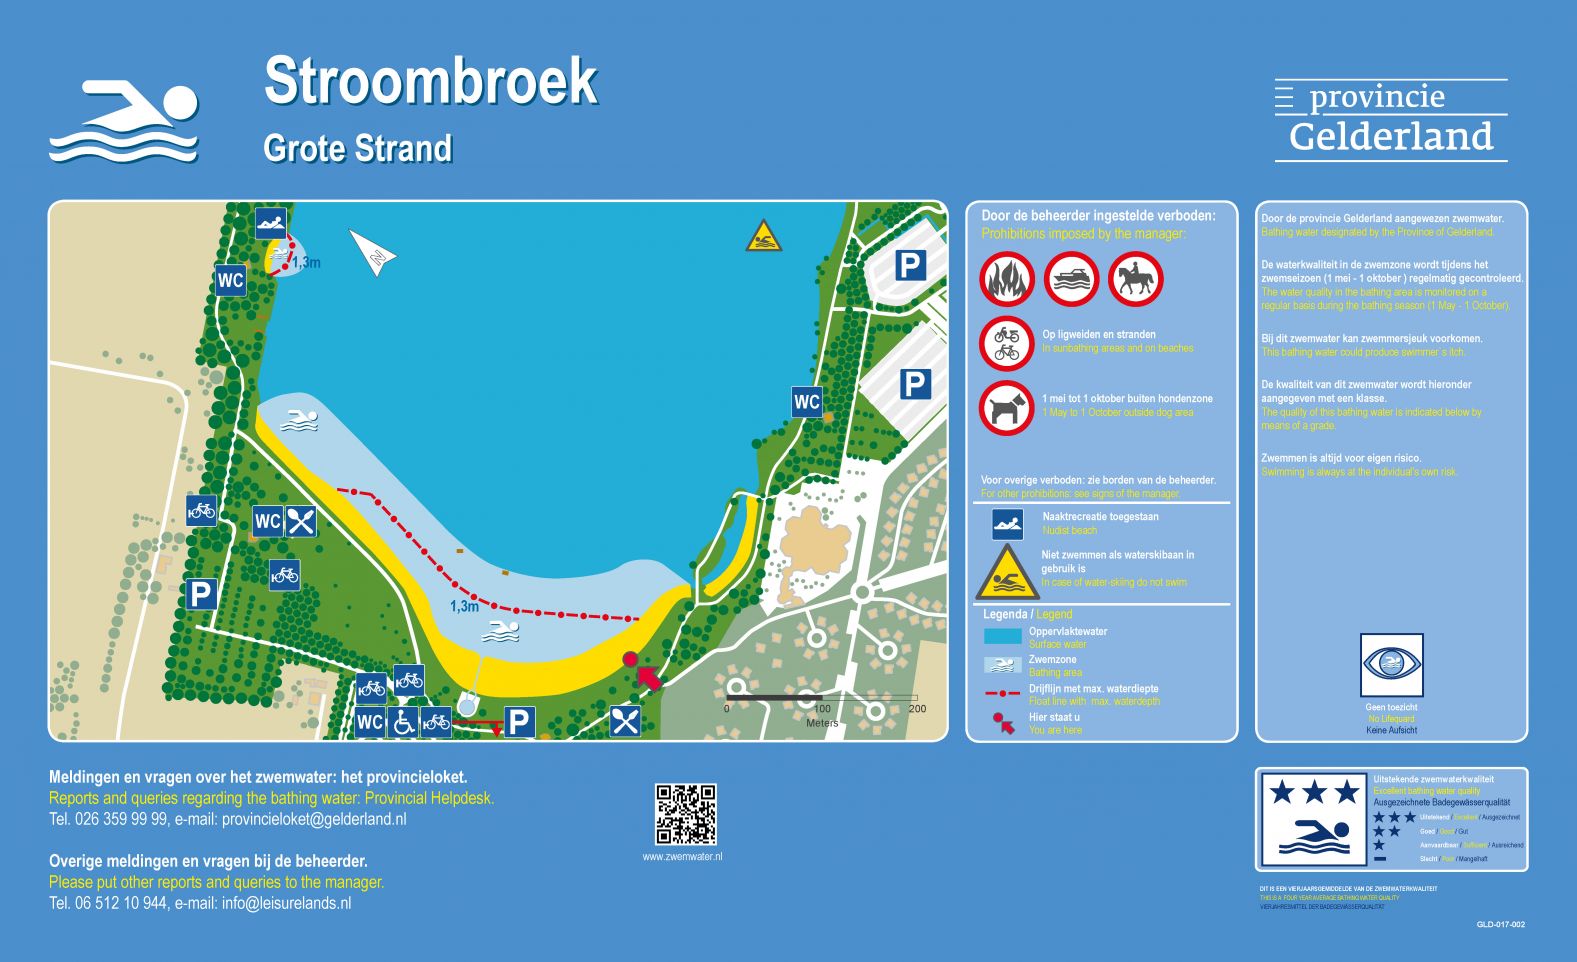 The information board at the swimming location Stroombroek Grote Strand